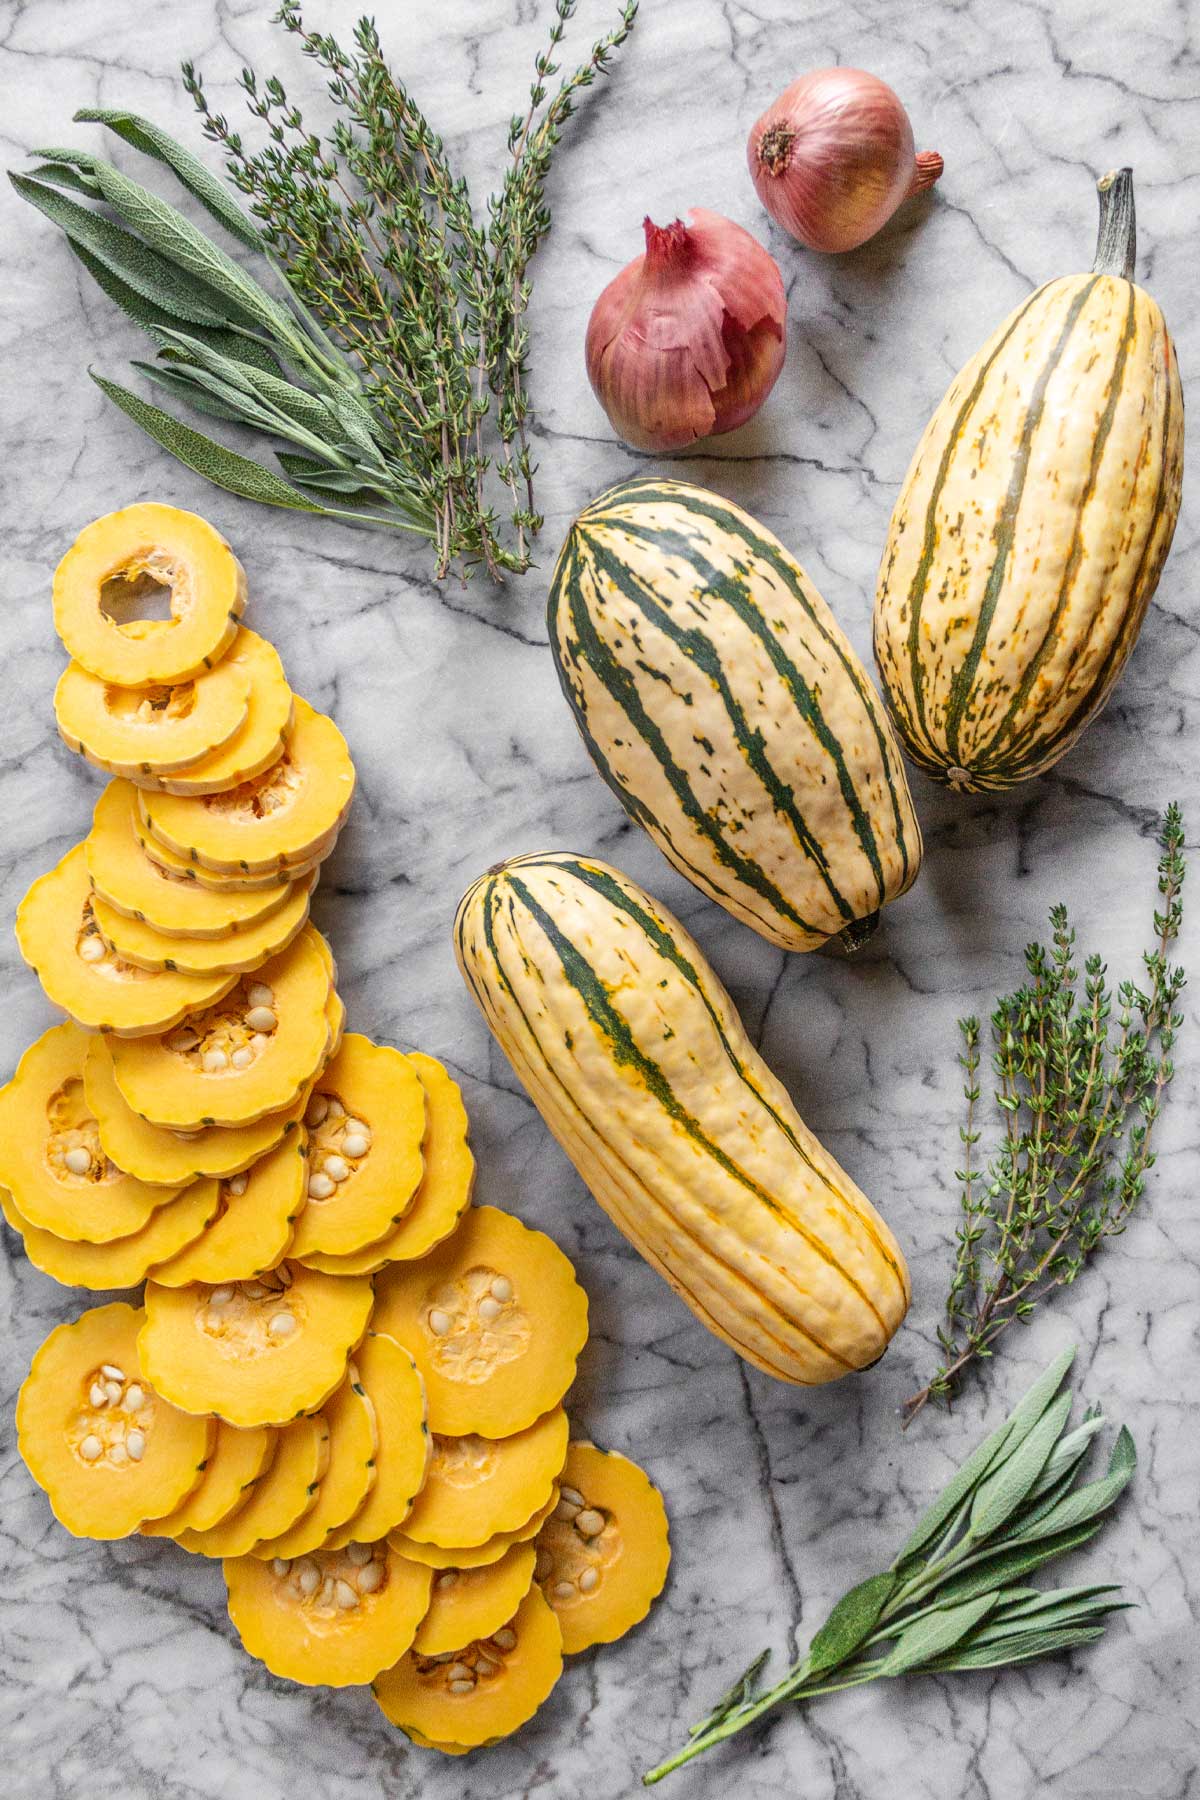 Some of the ingredients for Delicata Squash Gruyere Gratin, laid out on a marble slab: Delicata Squash, Shallots, Fresh Thymg & Sage